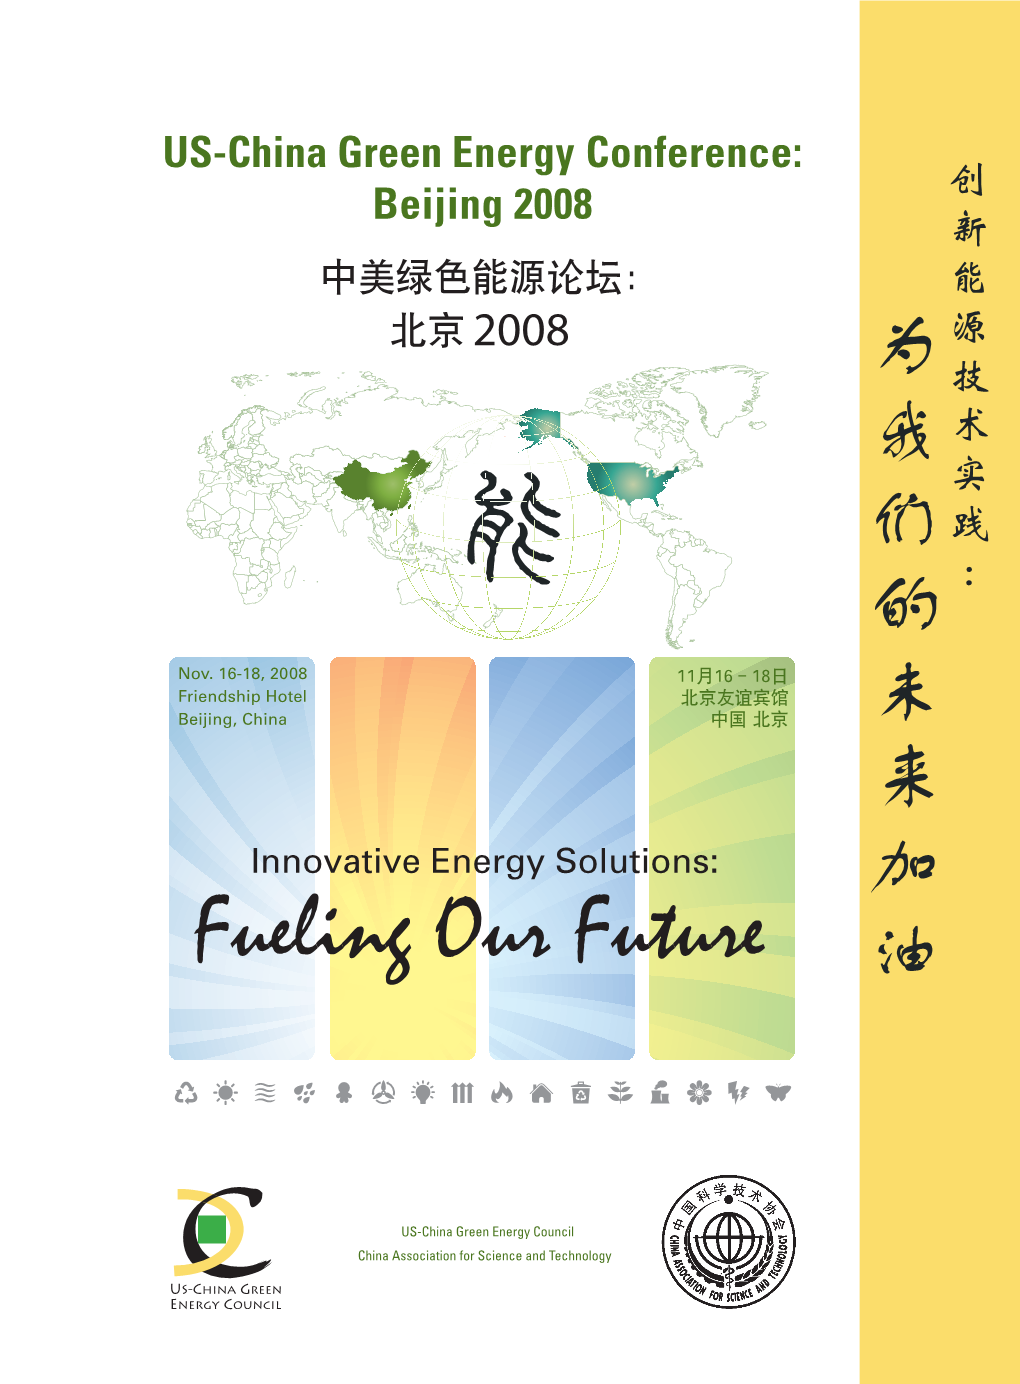 US-China Green Energy Conference: Beijing 2008